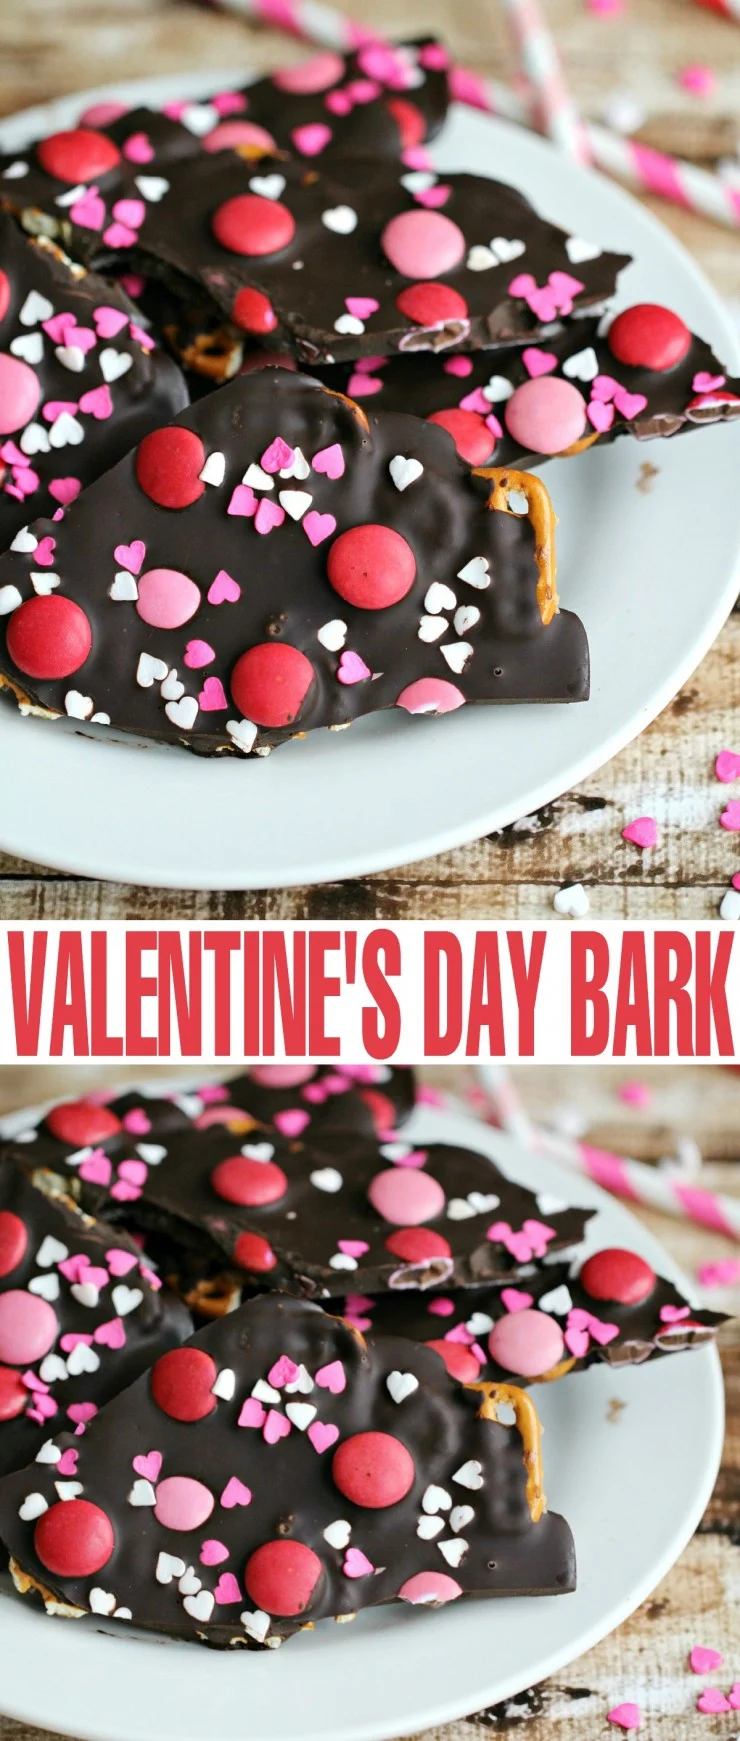 This Valentine's Day Bark is an adorable and quick to put together Valentine's Day Dessert Recipe!